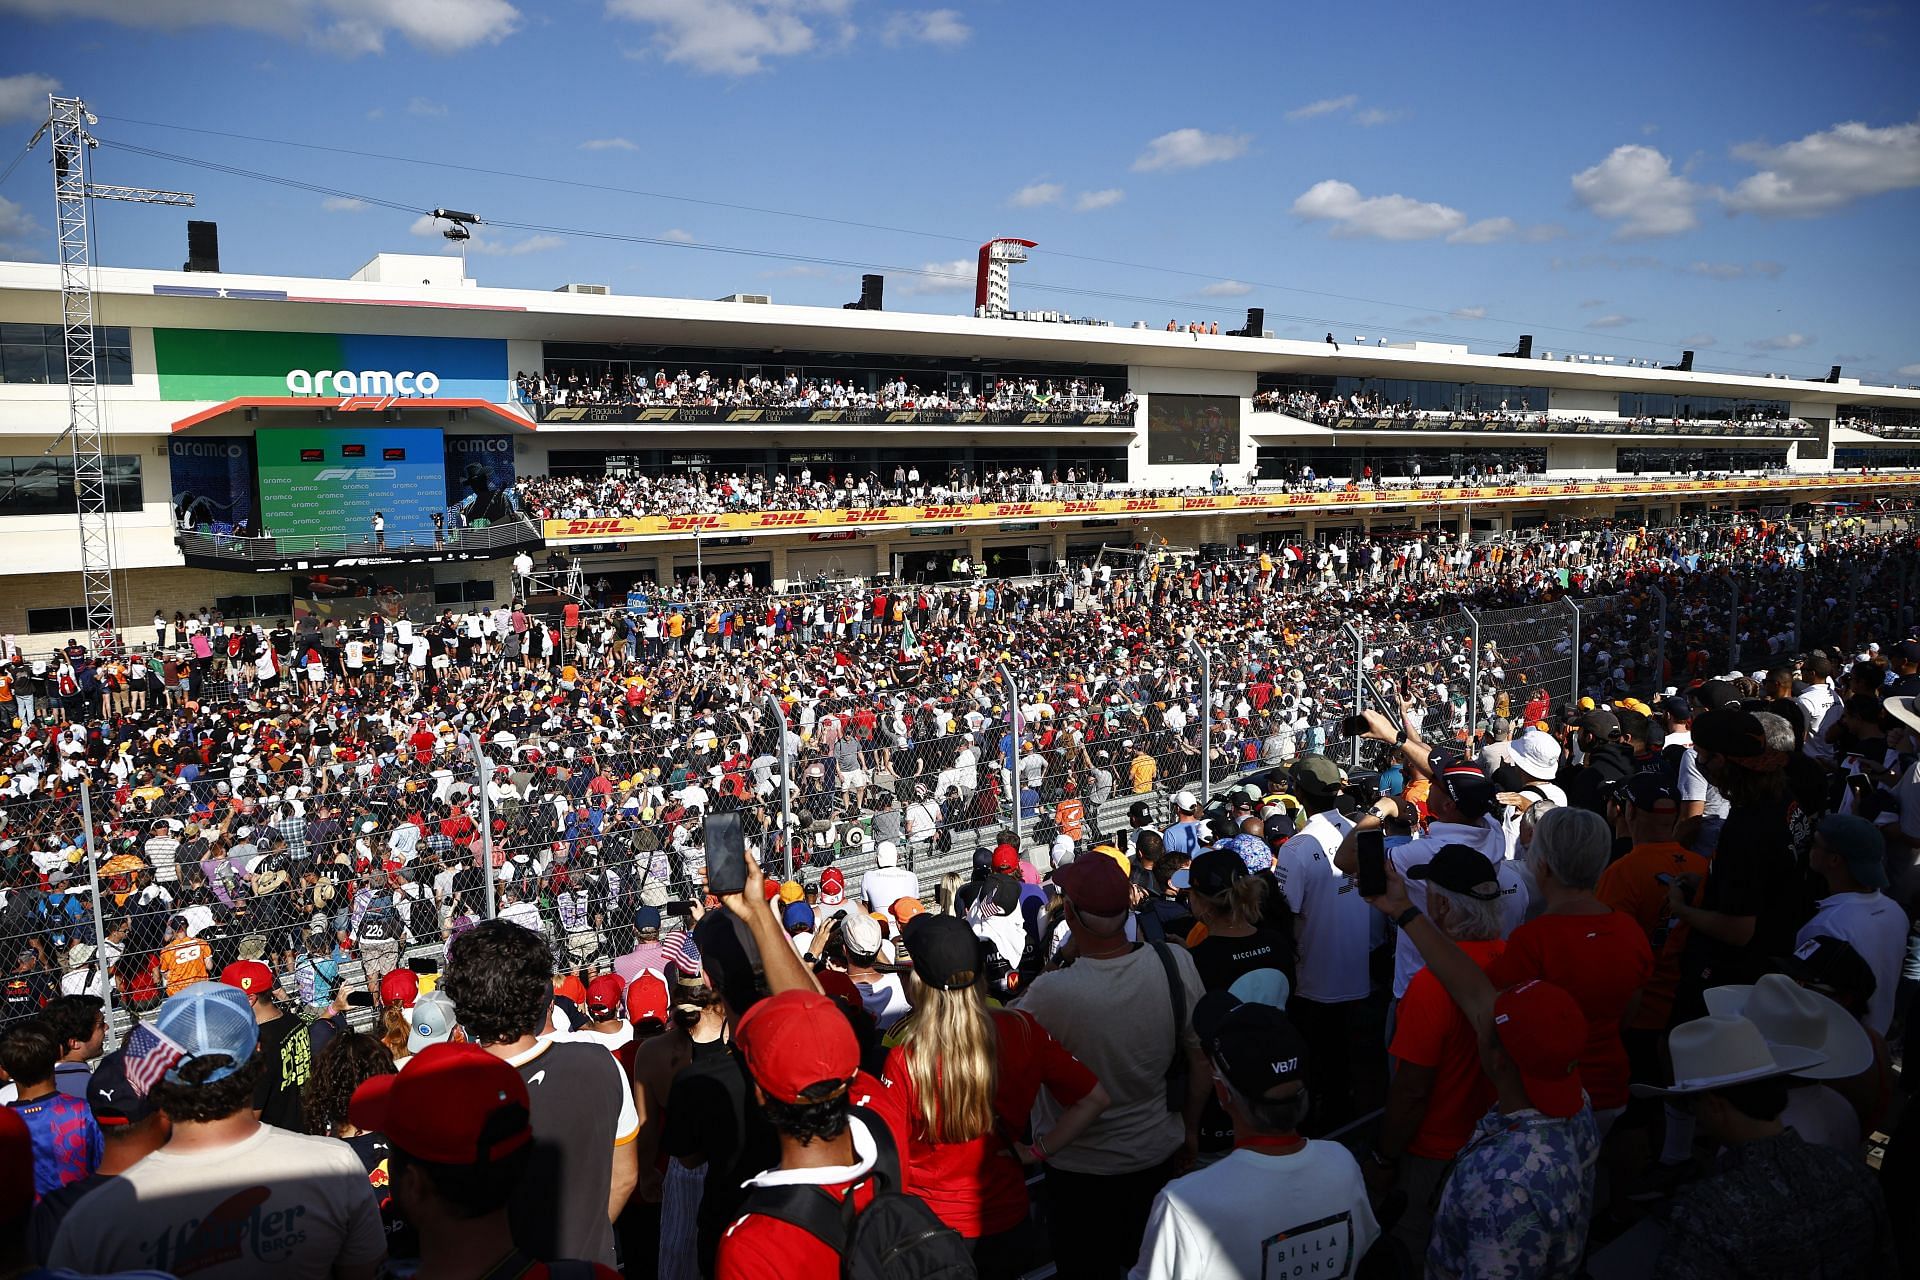 A general view of the podium celebrations during the F1 Grand Prix of USA at Circuit of The Americas on in Austin, Texas. (Photo by Jared C. Tilton/Getty Images)